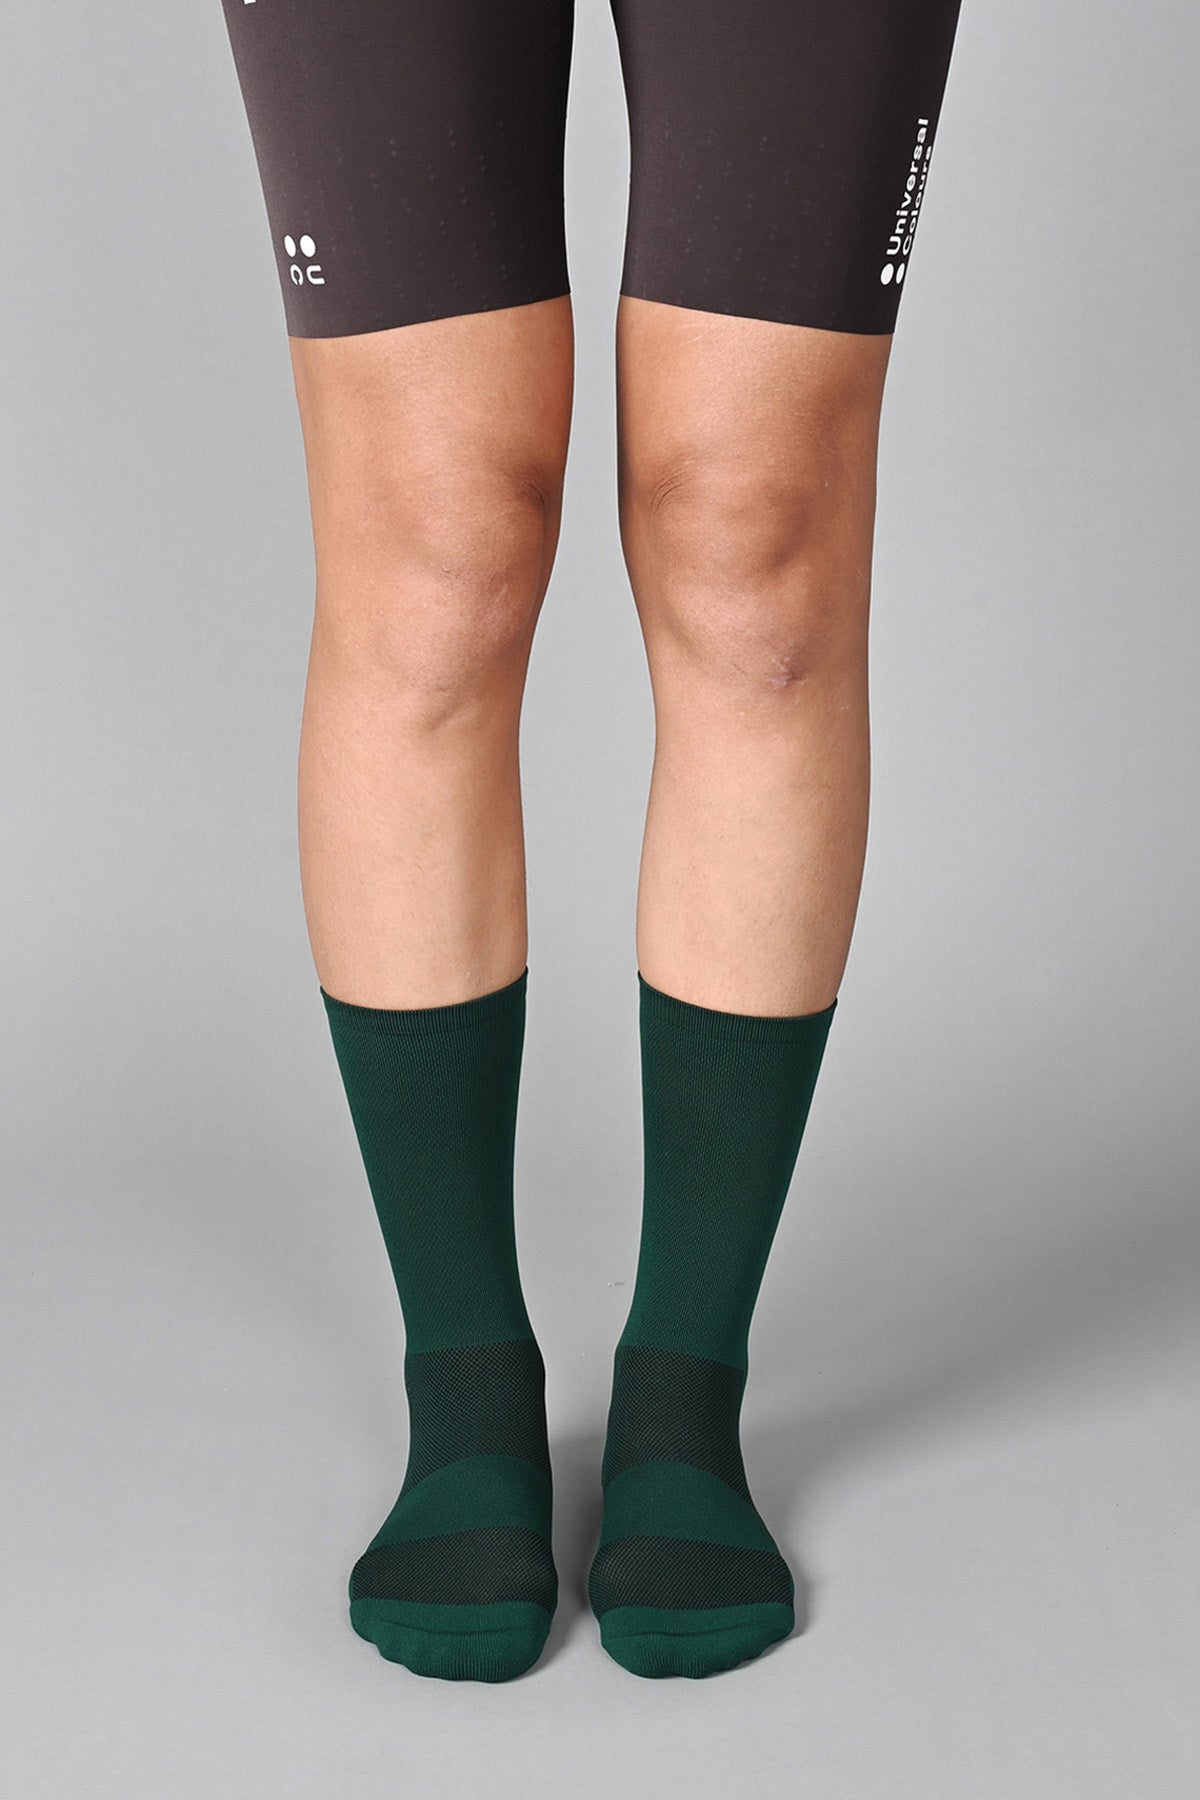 STEALTH - ENGLISH GREEN FRONT | BEST CYCLING SOCKS